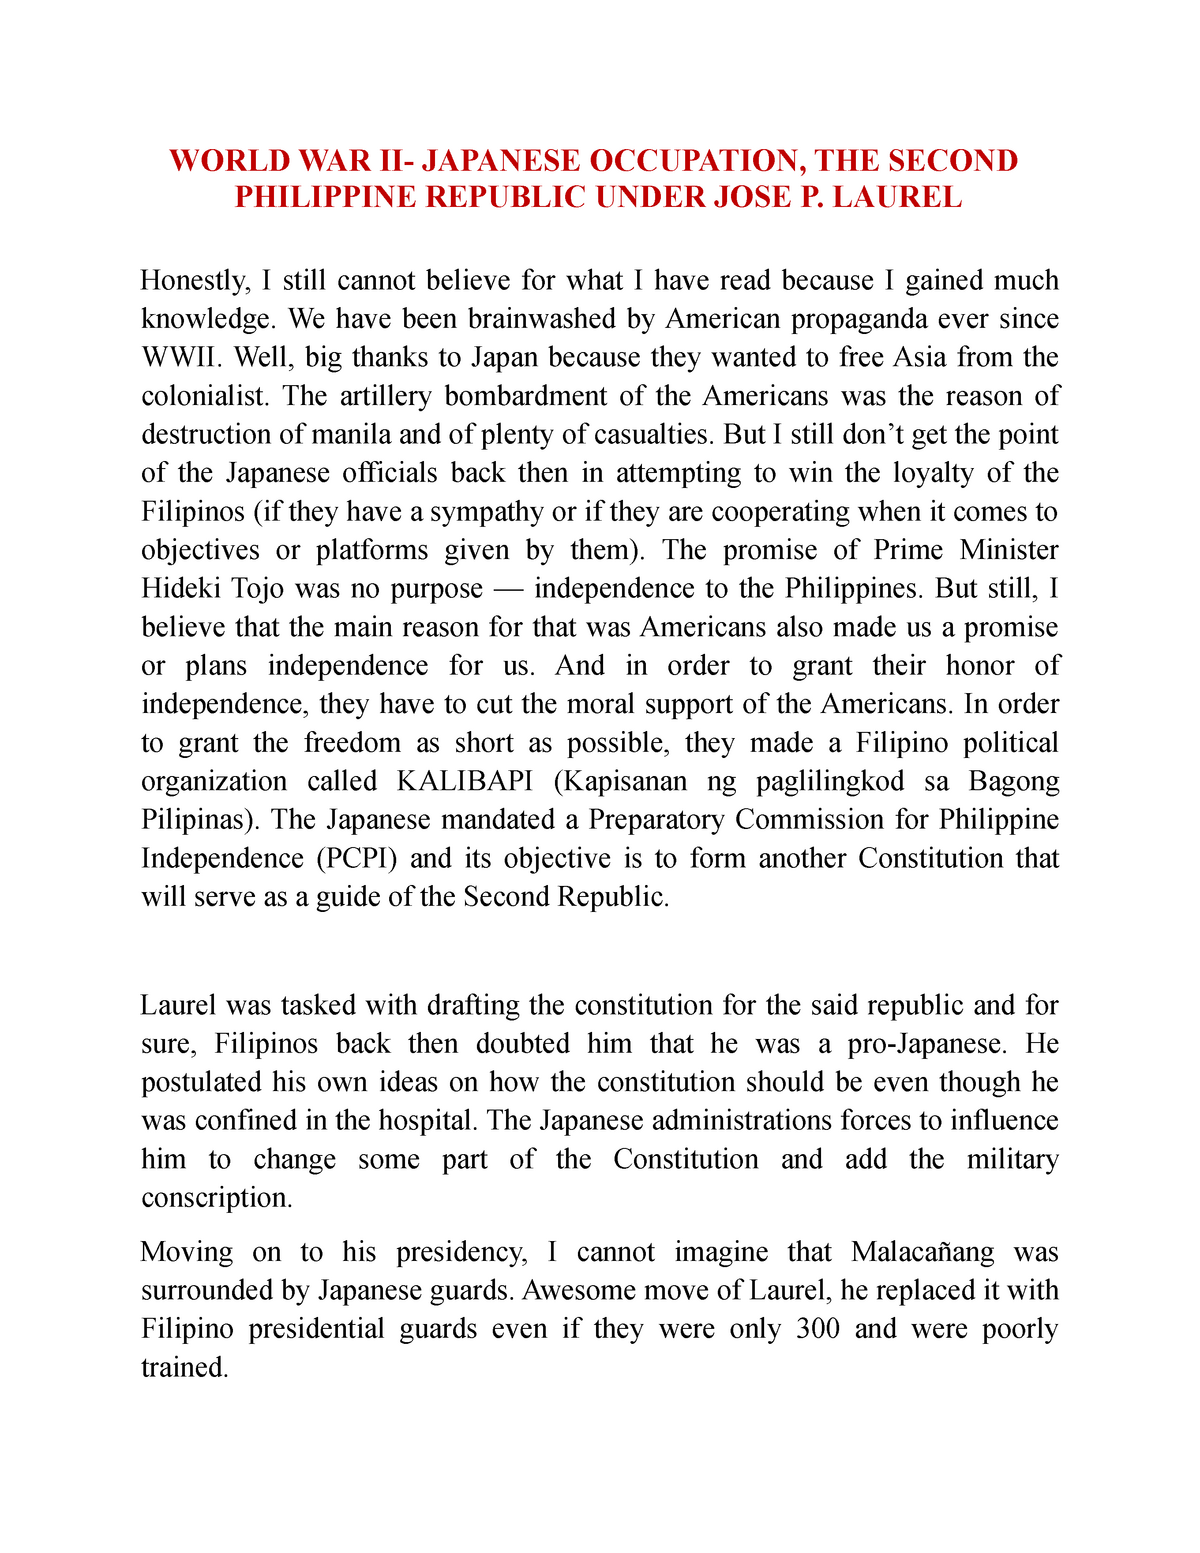 essay about world war 2 in the philippines